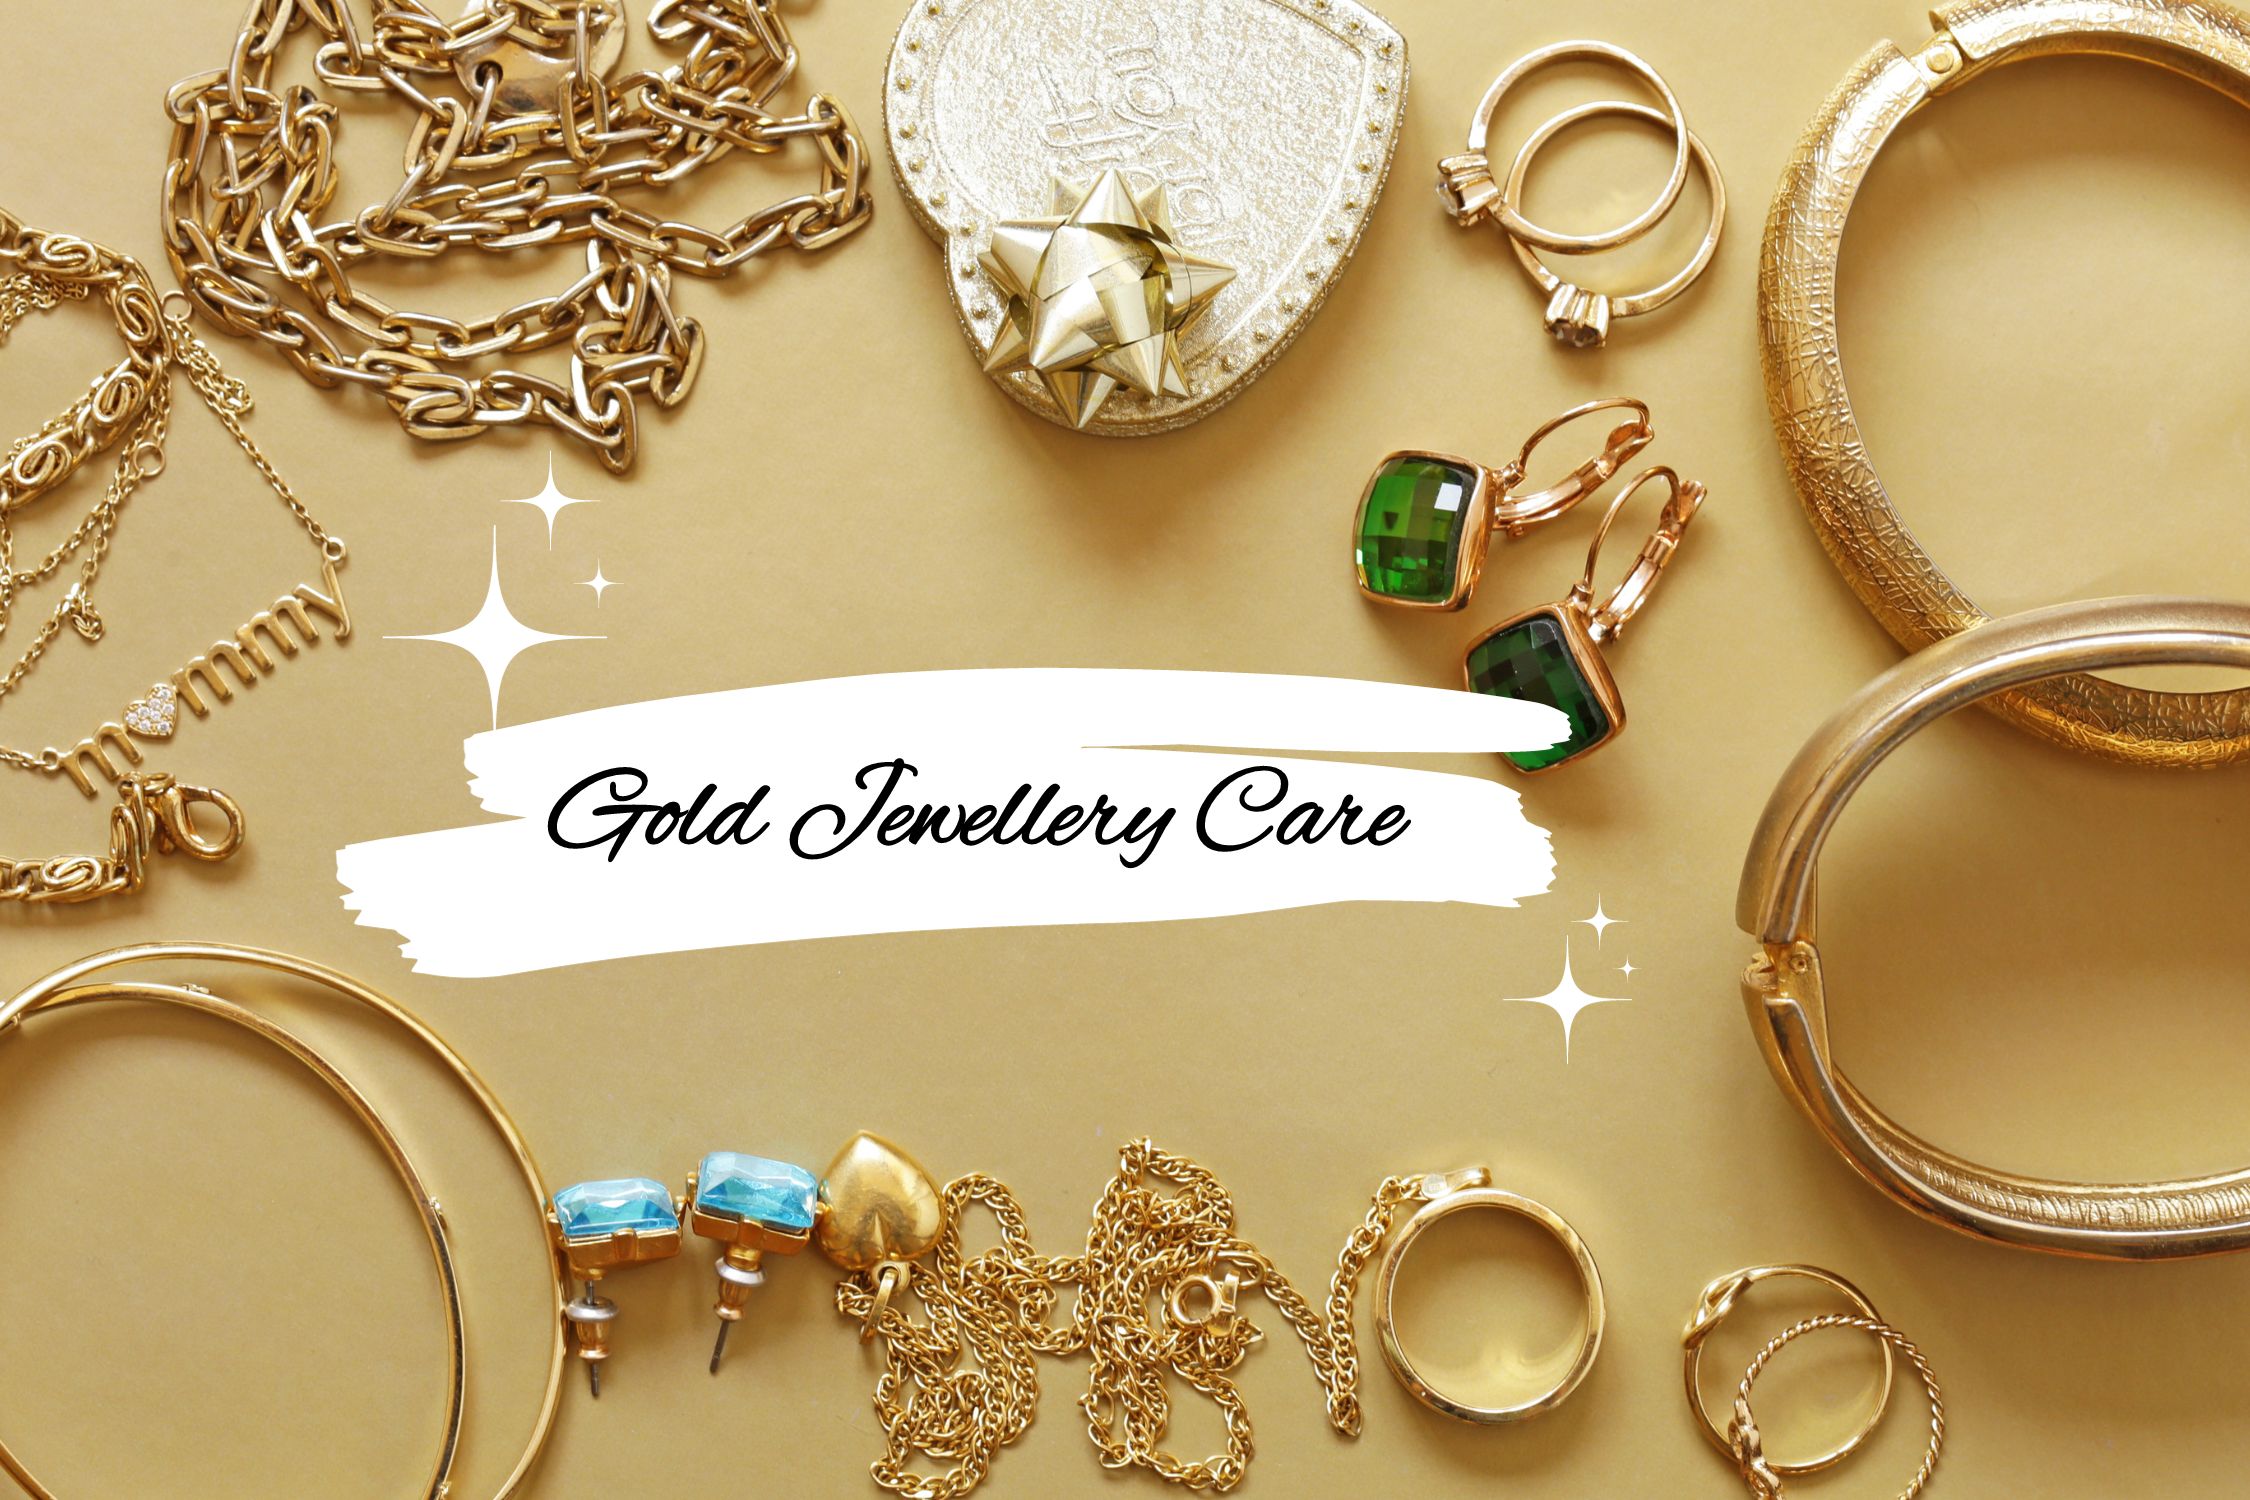 The Do's and Don'ts of Gold Jewellery Care